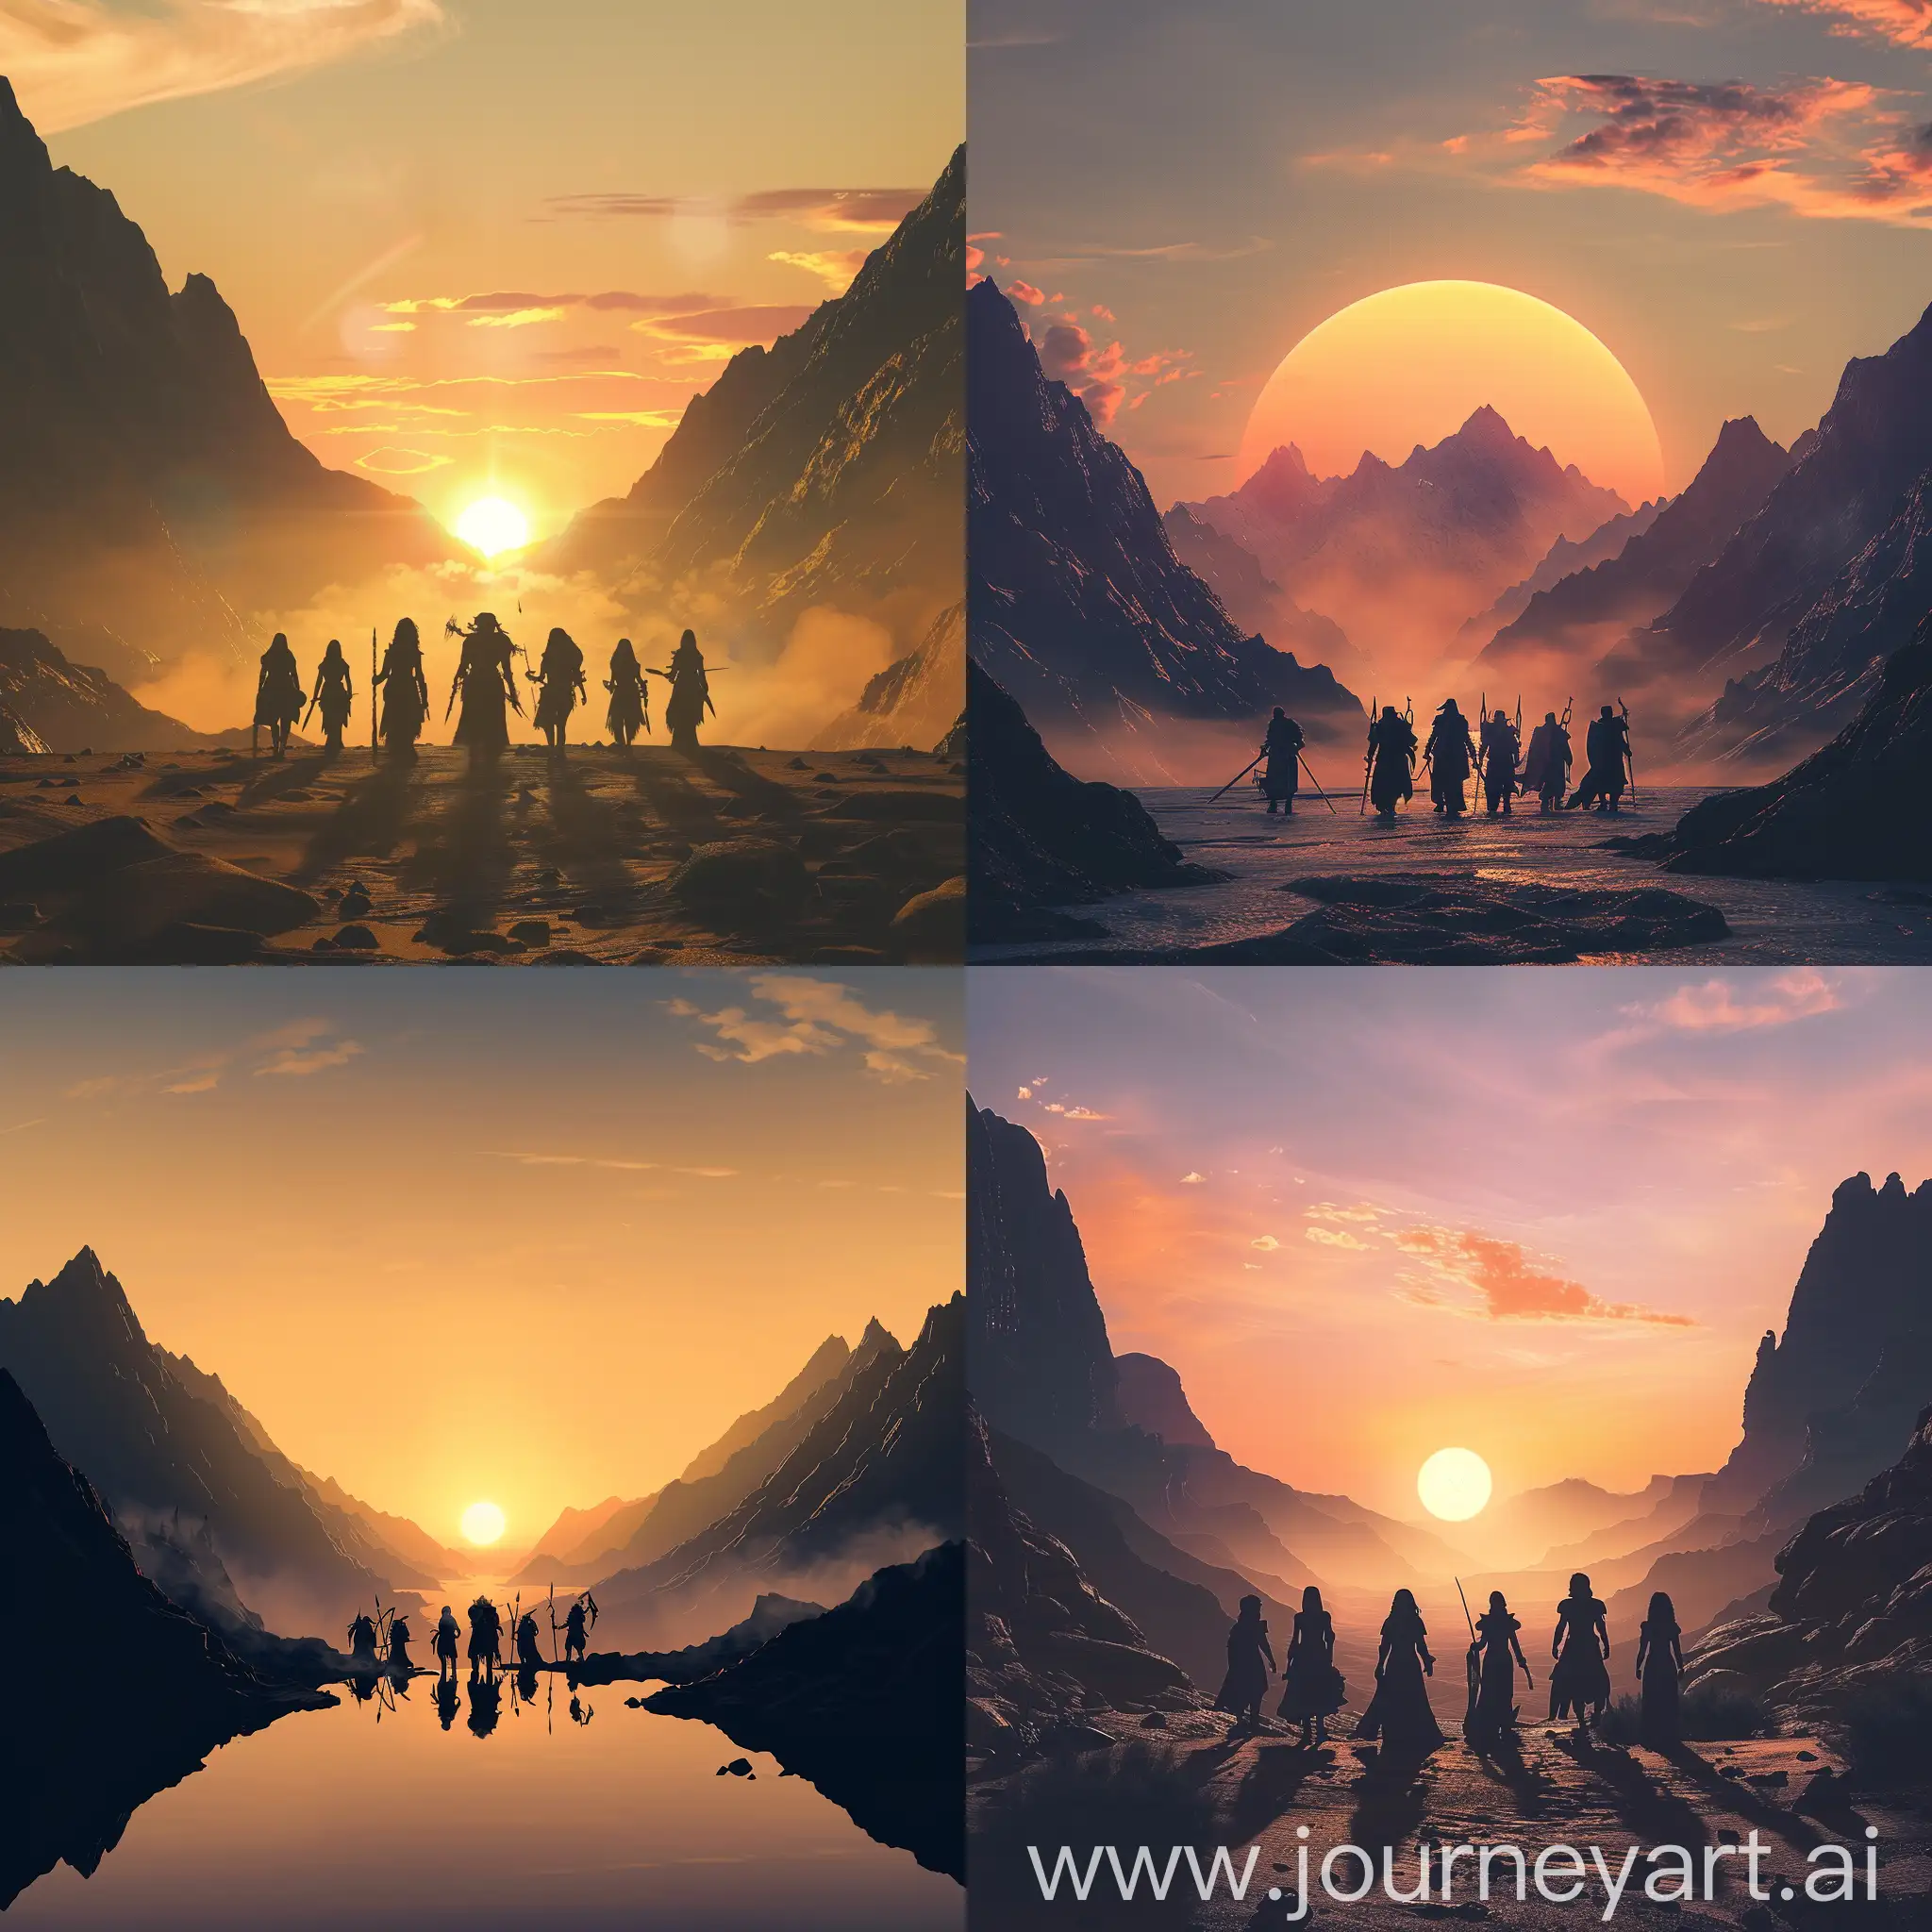 clear sunset, mountains left and right, silhouettes of fantasy travelers in the center, front view